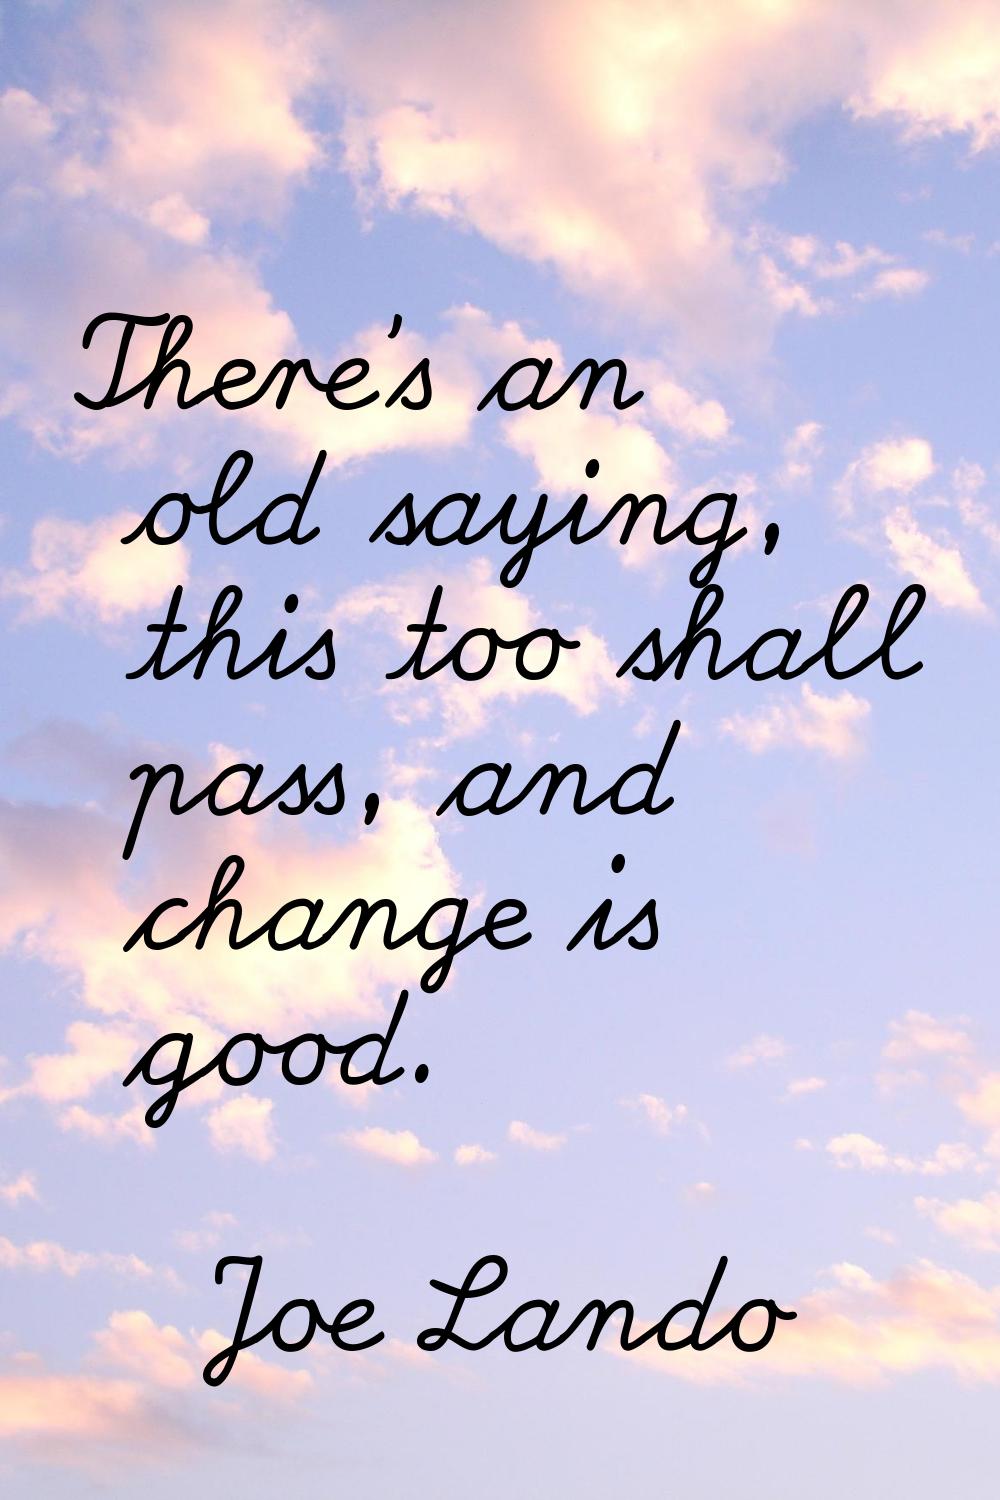 There's an old saying, this too shall pass, and change is good.